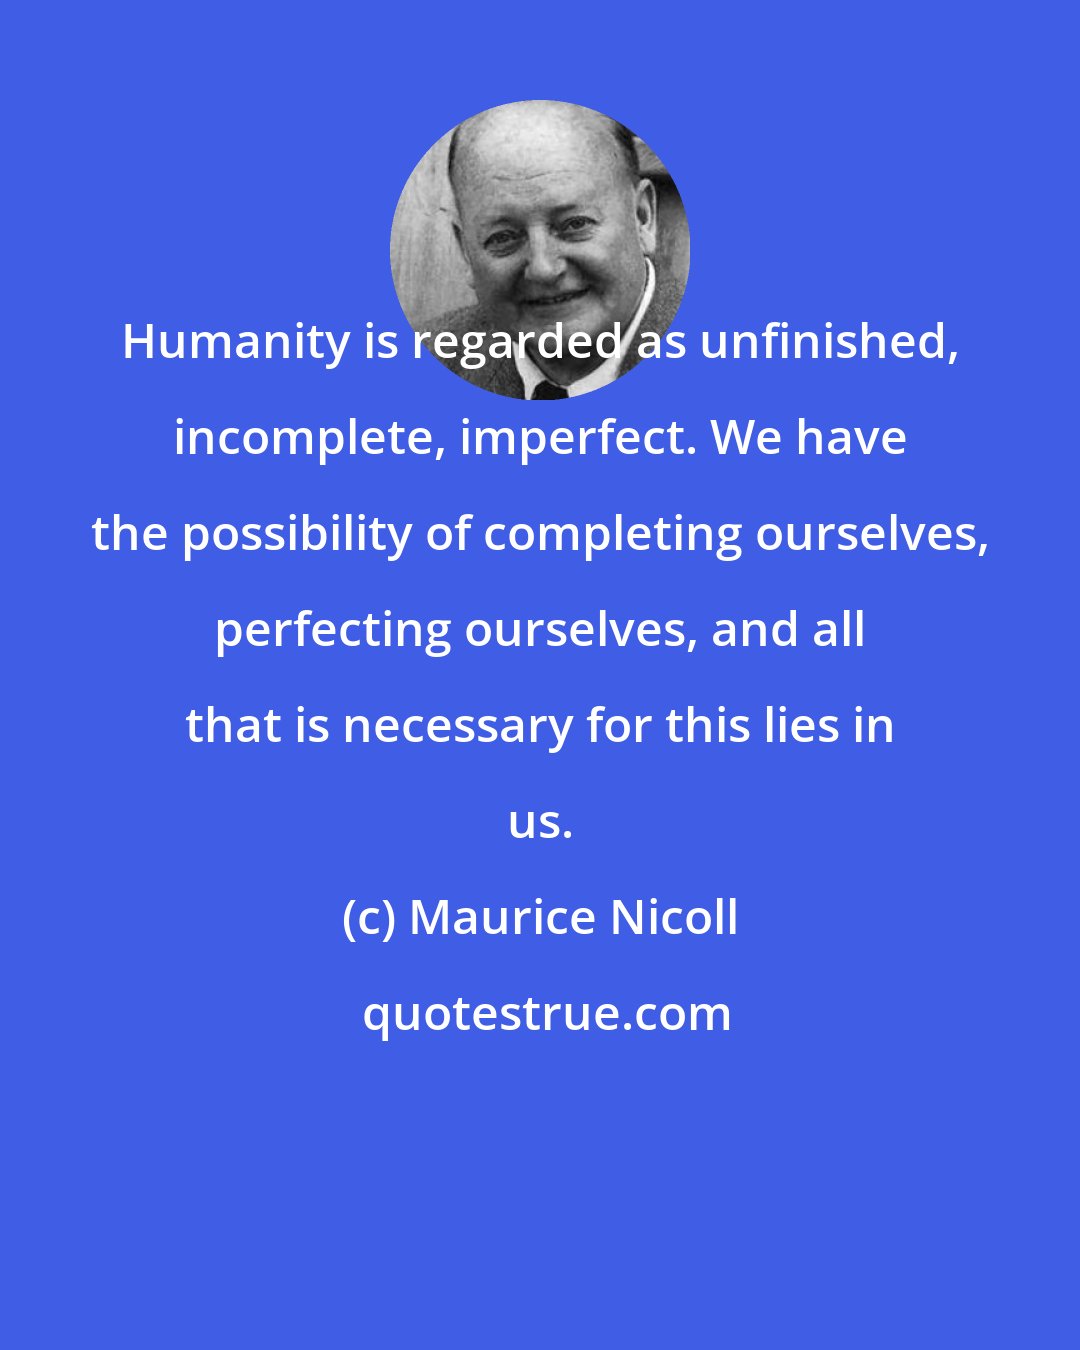 Maurice Nicoll: Humanity is regarded as unfinished, incomplete, imperfect. We have the possibility of completing ourselves, perfecting ourselves, and all that is necessary for this lies in us.